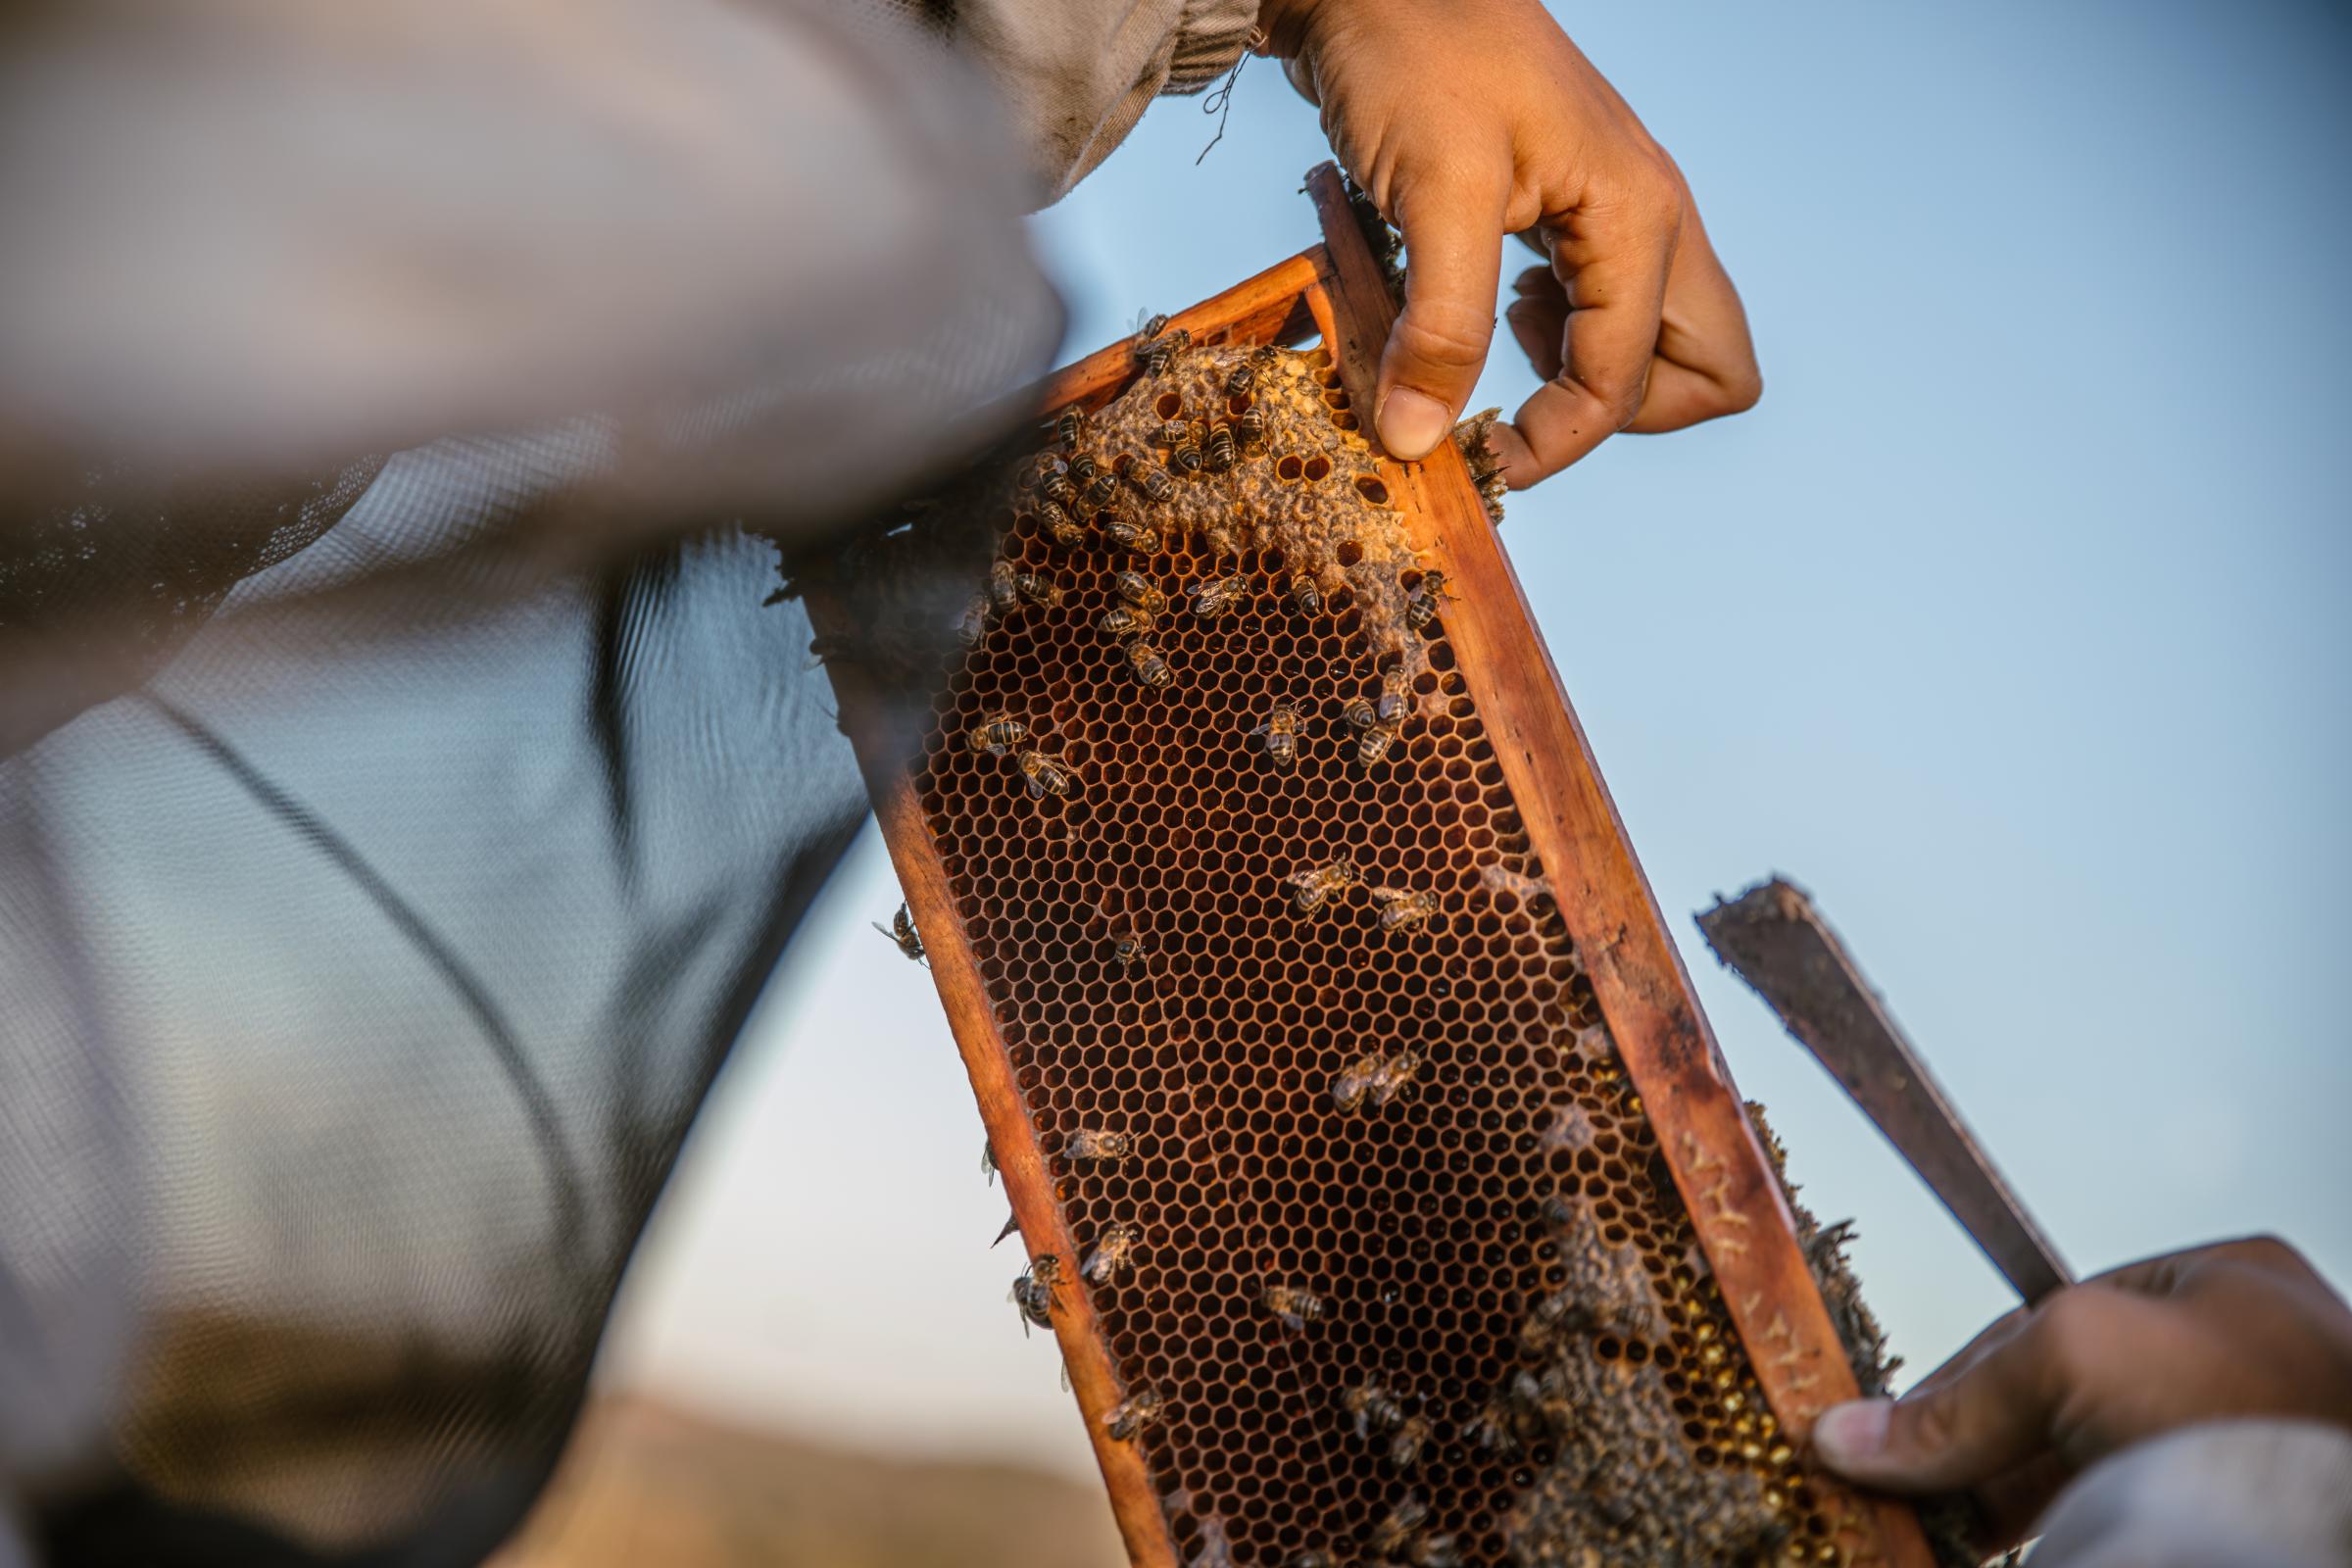 Portuguese Bee. - Faced with the growing threats of climate change, an...